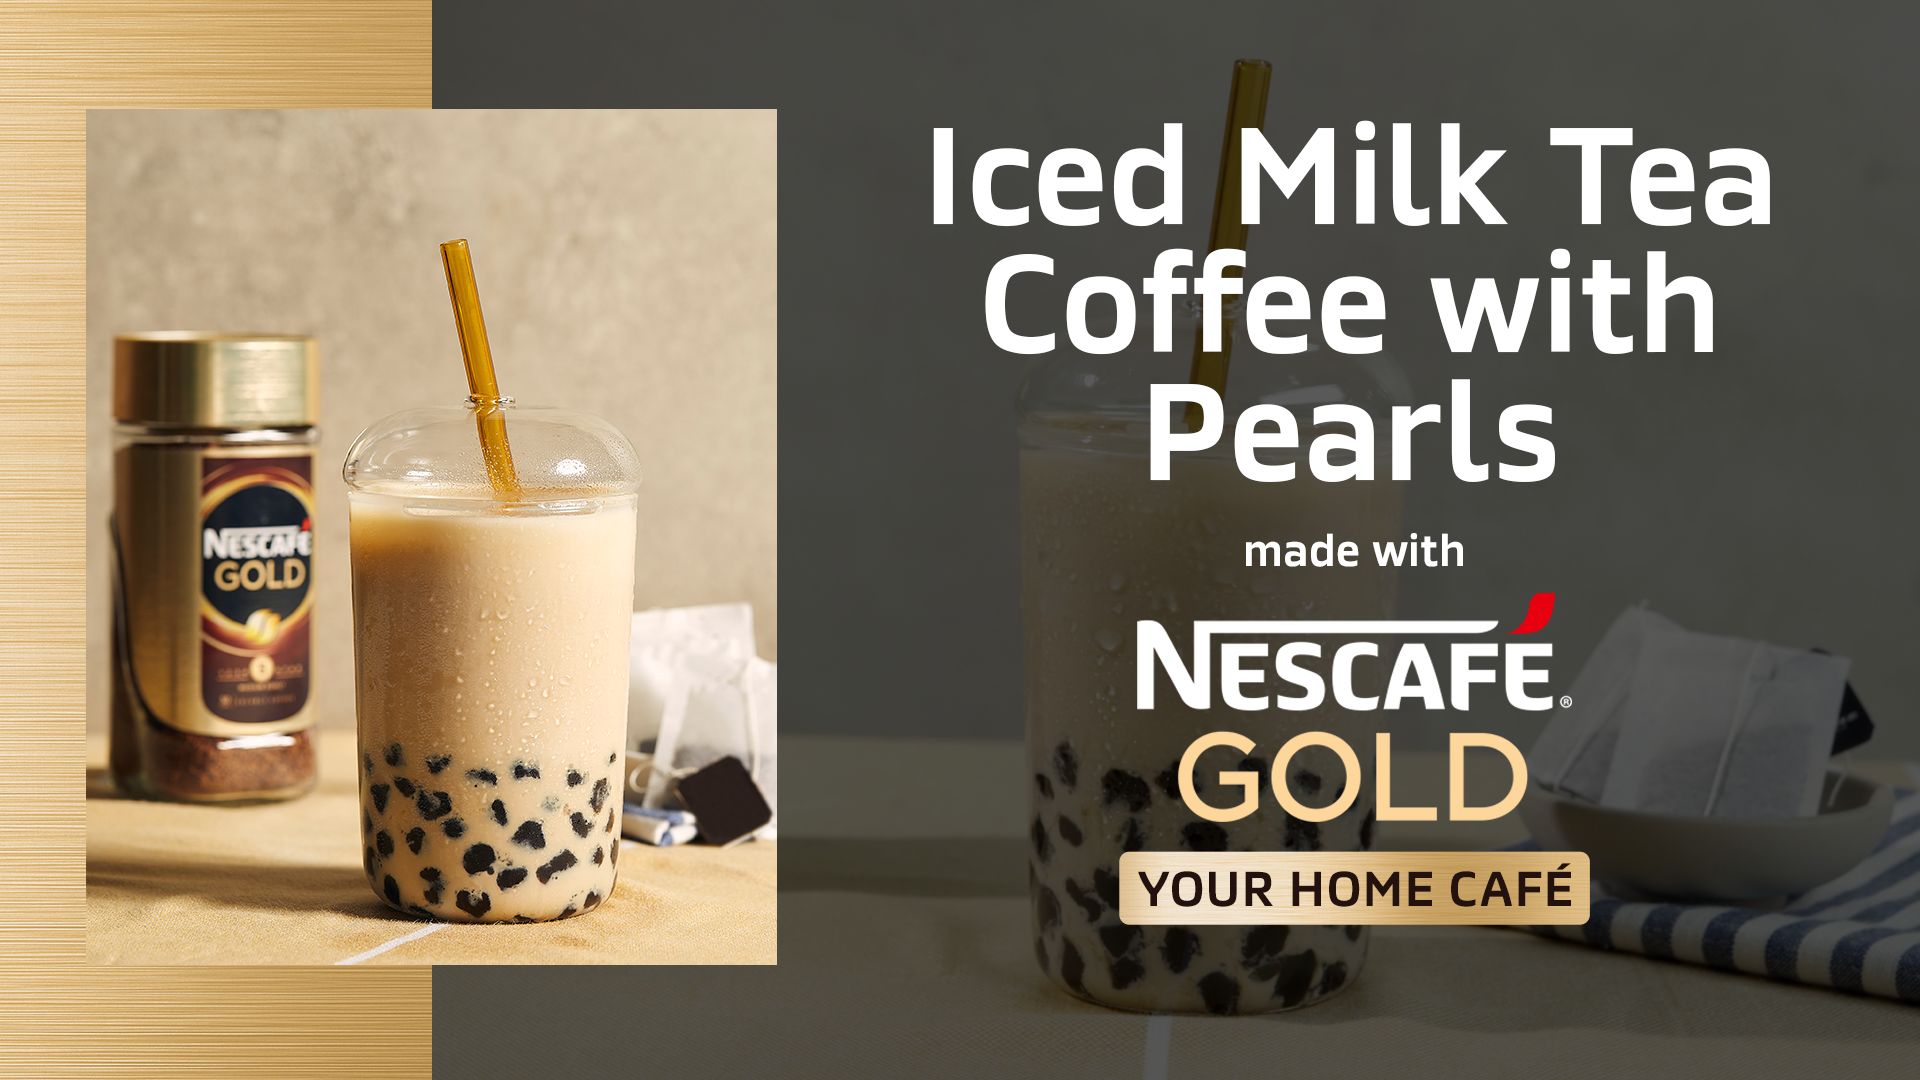 Iced Milktea Coffee with Pearls recipe